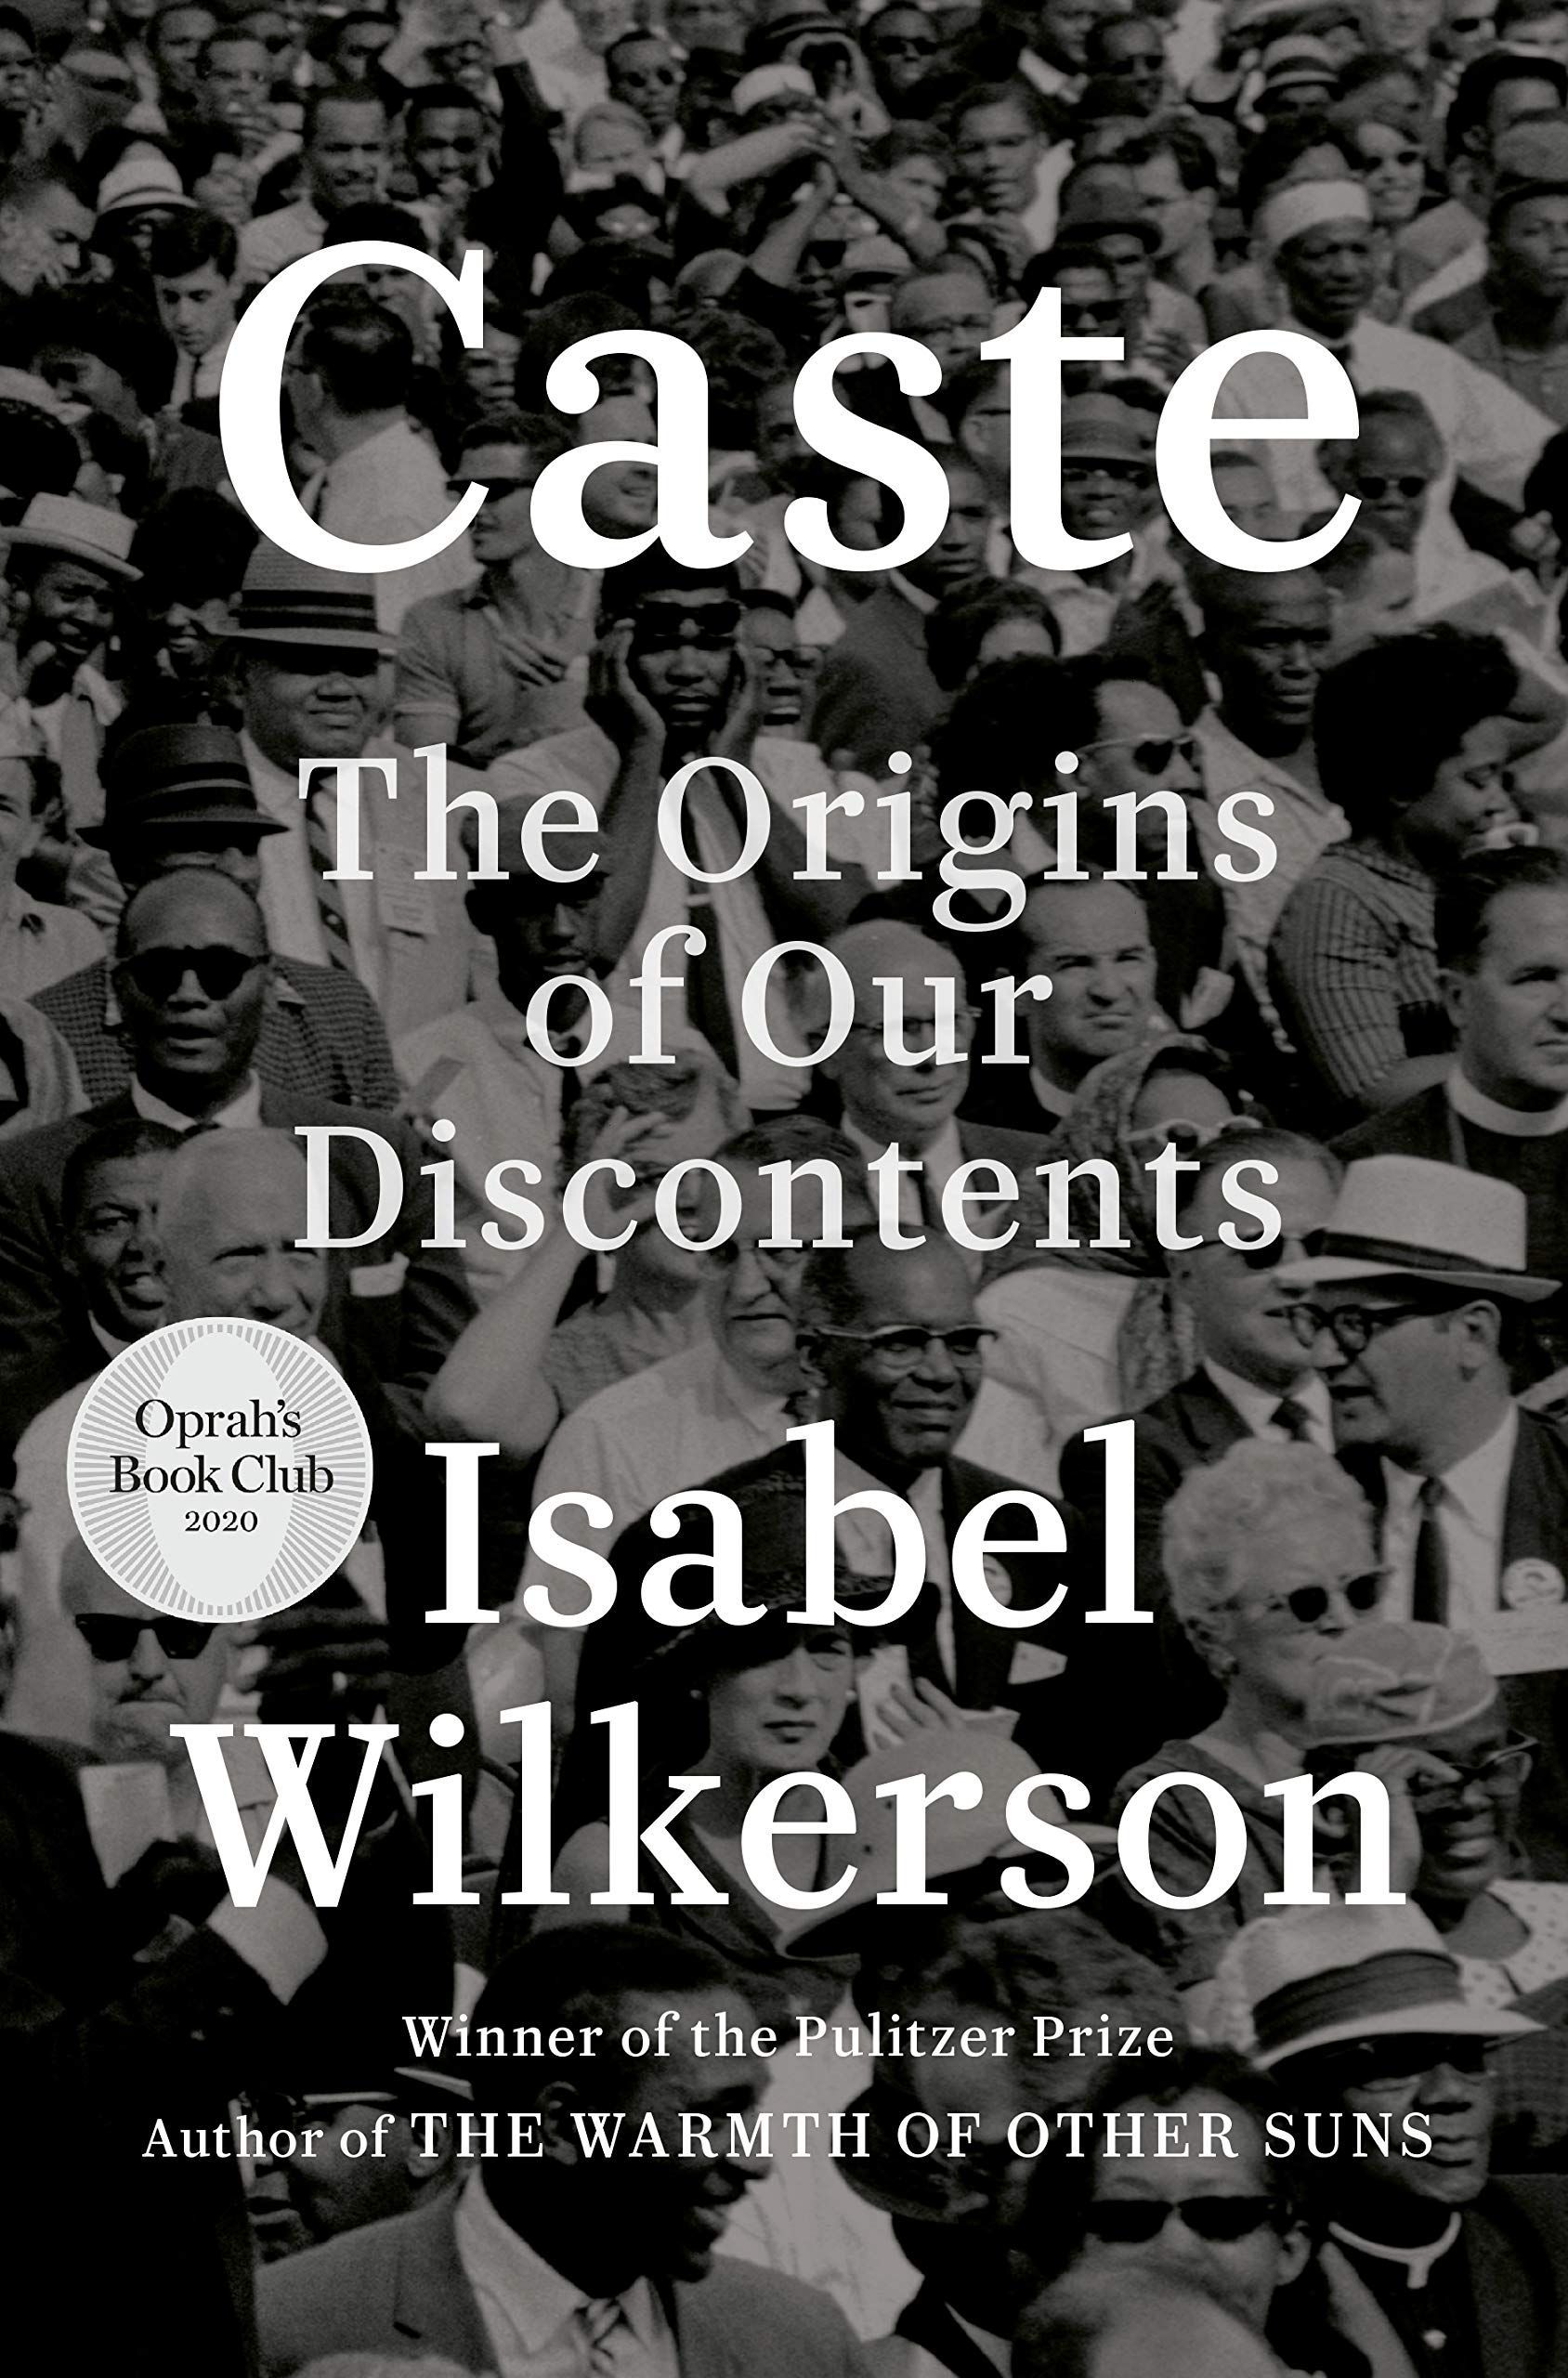 No Mere Slogans: On Isabel Wilkerson’s “Caste: The Origins of Our Discontents”